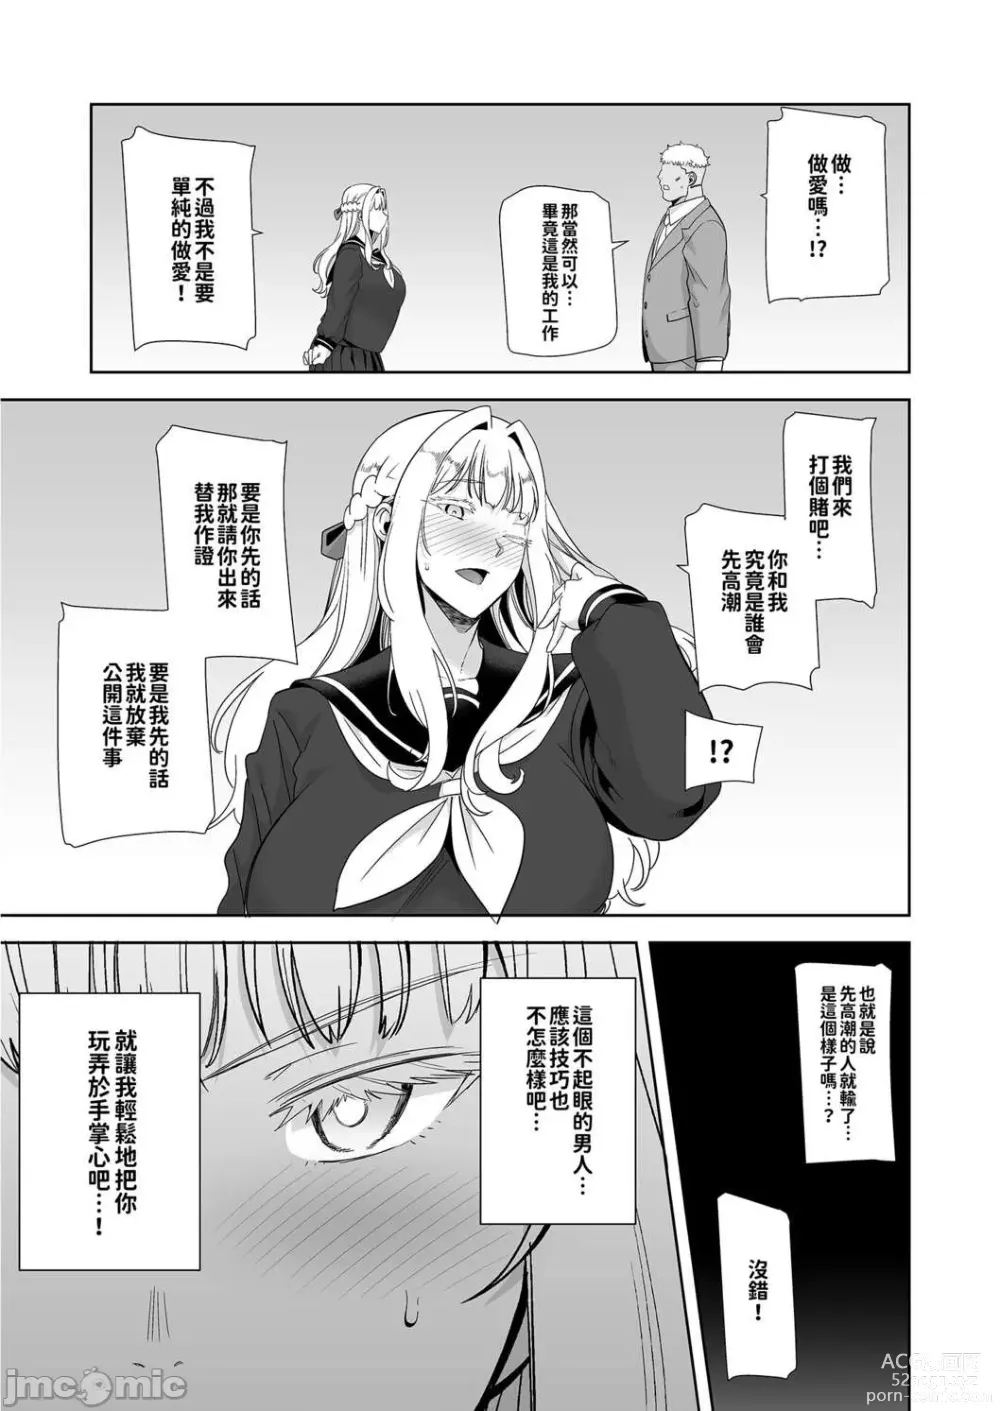 Page 11 of doujinshi 聖華女学院高等部公認竿おじさん 4